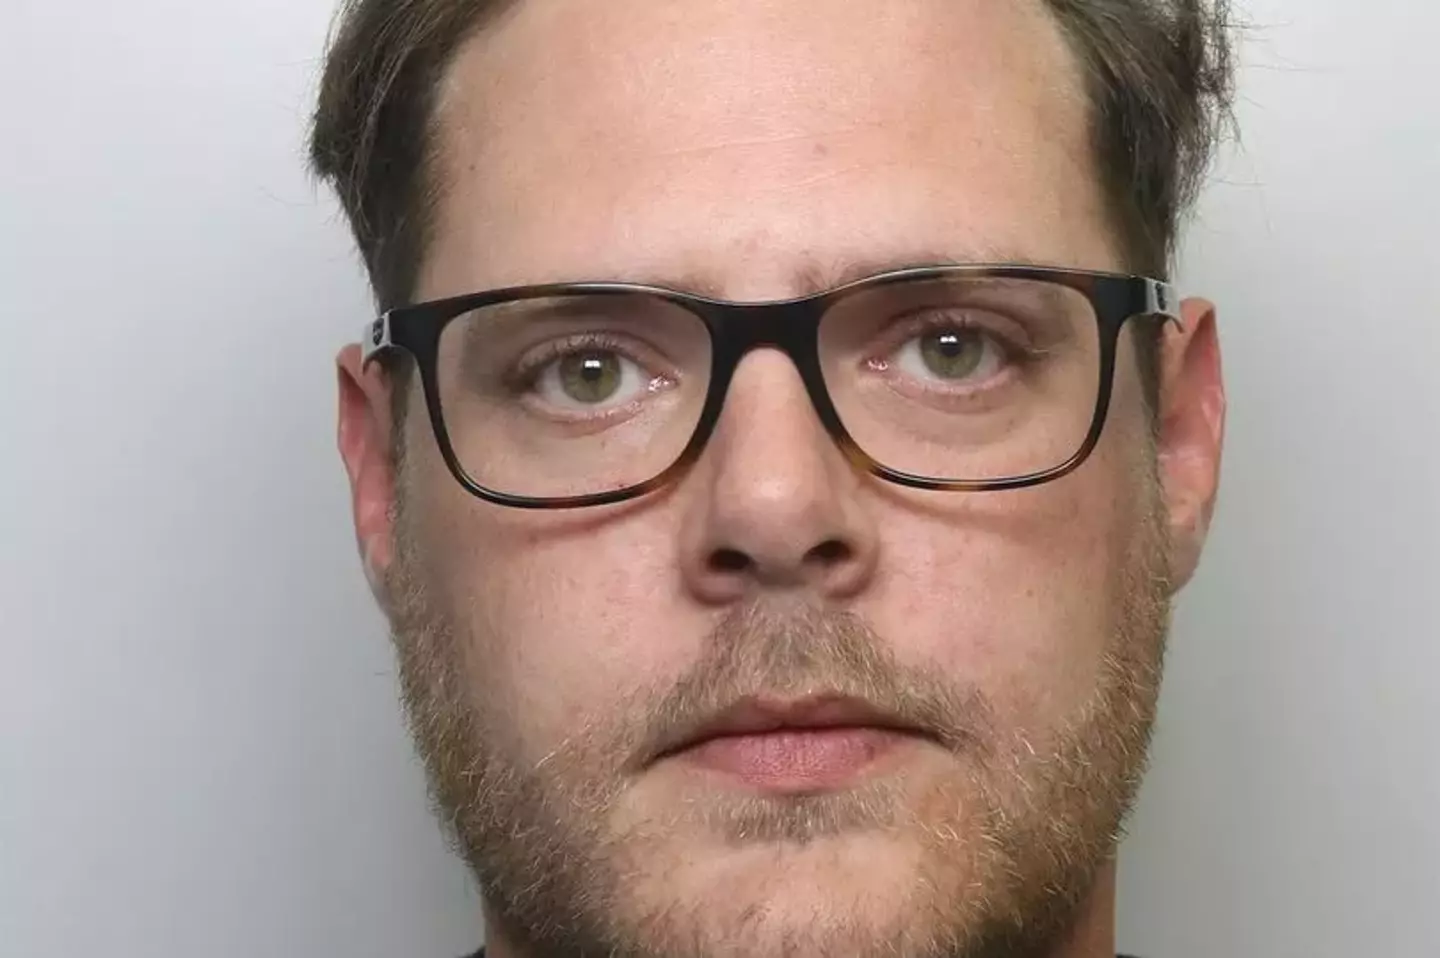 The West Yorkshire man has been sentenced to time in prison. (West Yorkshire Police)